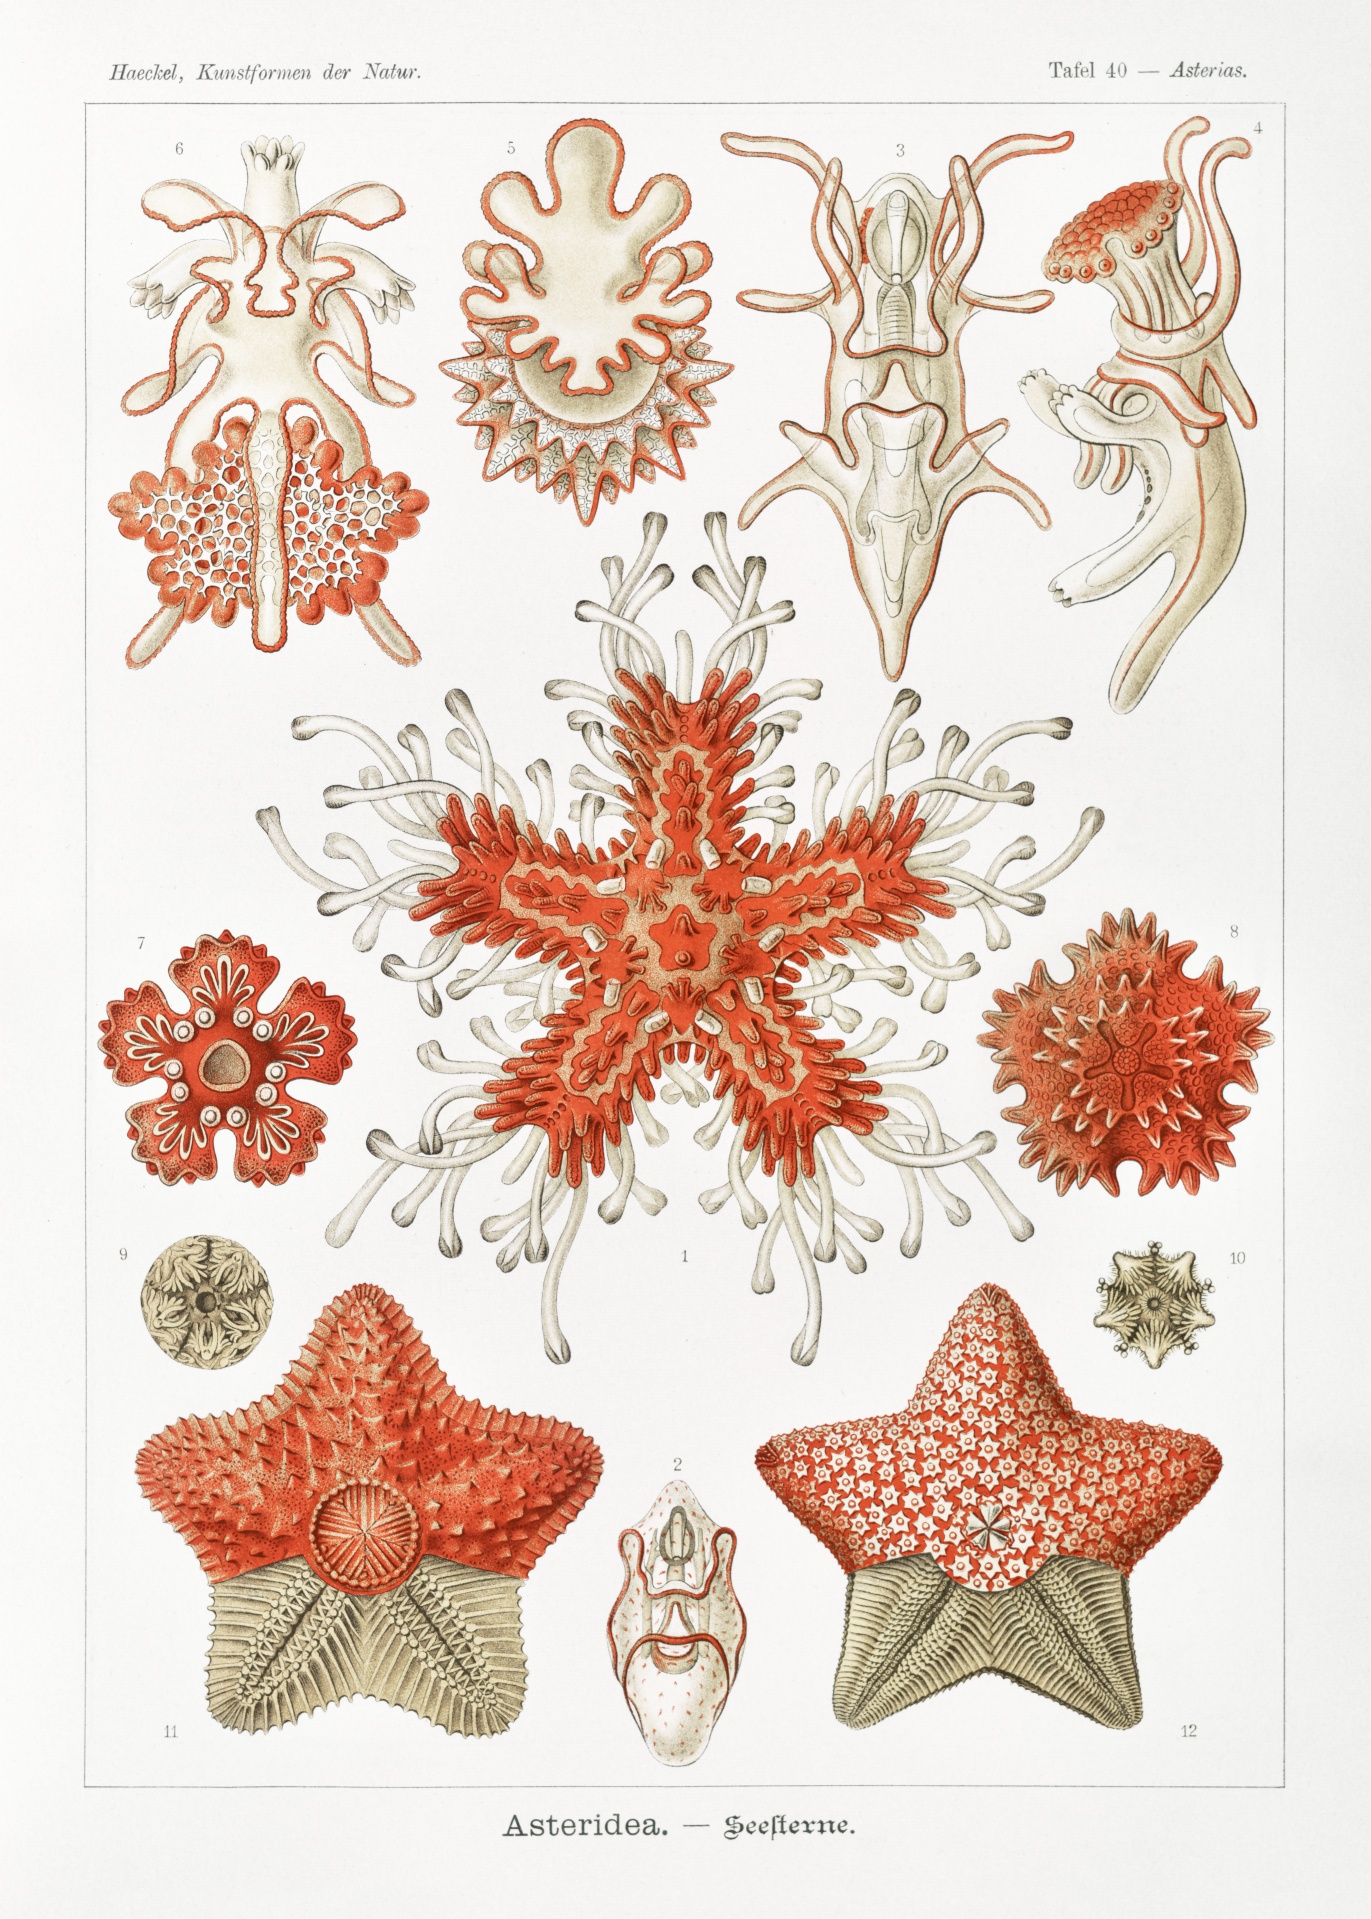 Coral reef starfish vintage art mollusks jellyfish coral old antique 1900 century vintage illustration painted blackboard graphic poster print design colorful colorful nature animals lake sea deep sea ocean beach water